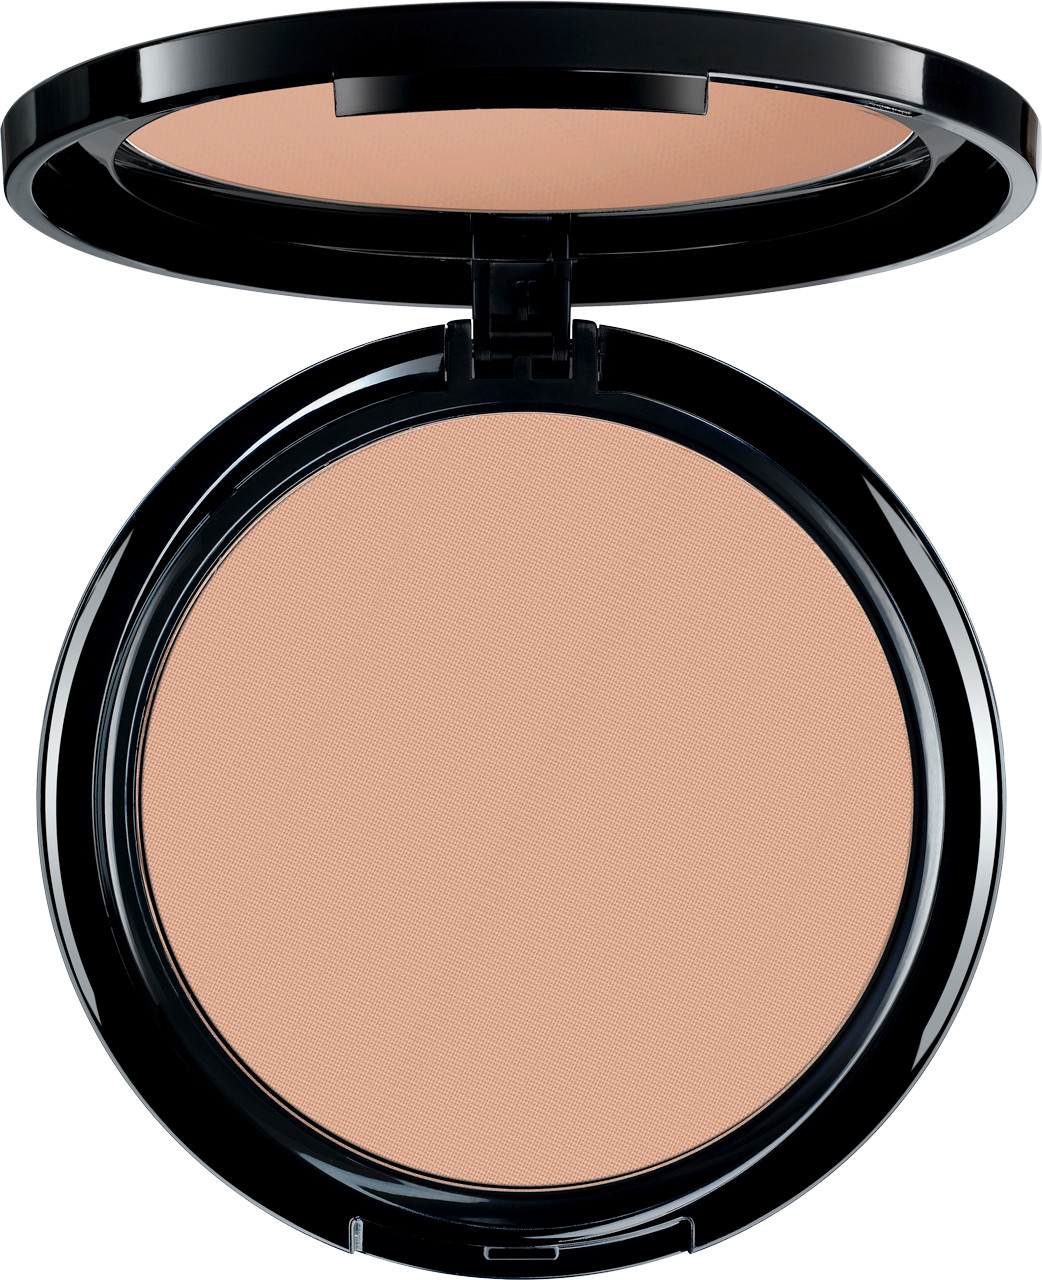  ARABESQUE Mineral Compact Foundation #59 Pink Beige